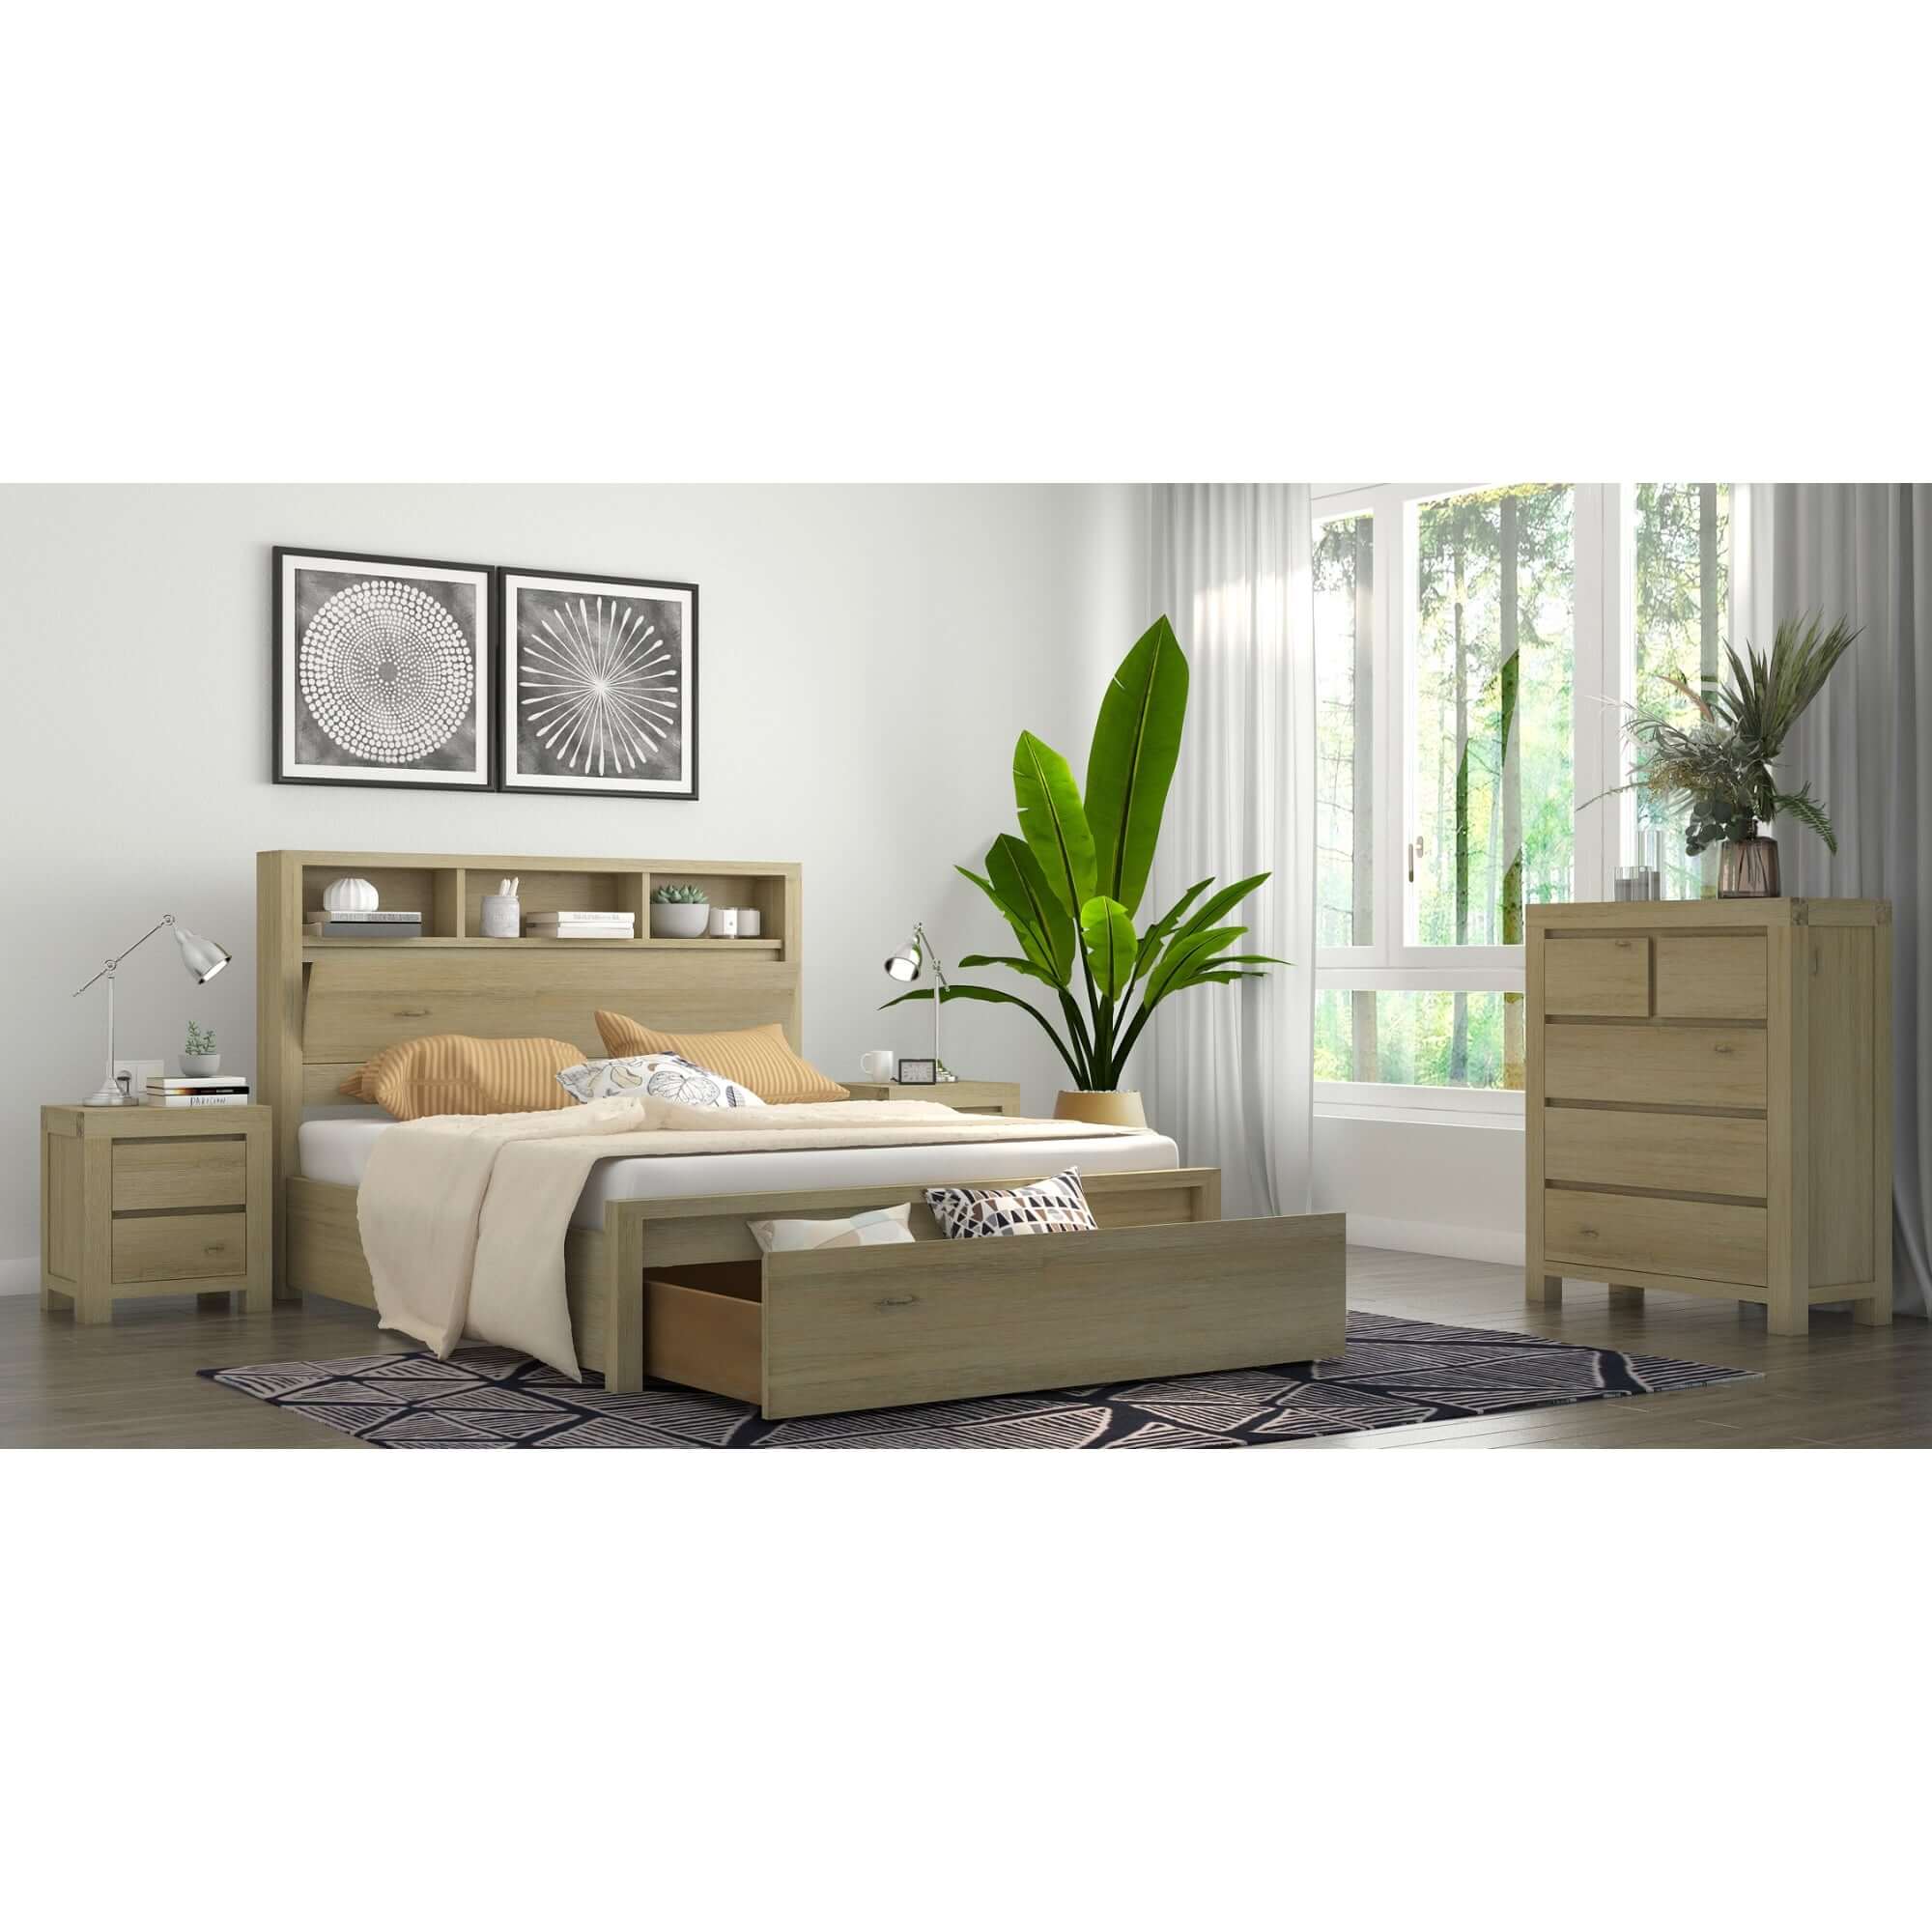 Queen Size Brunet Bed Frame with Storage-Upinteriors